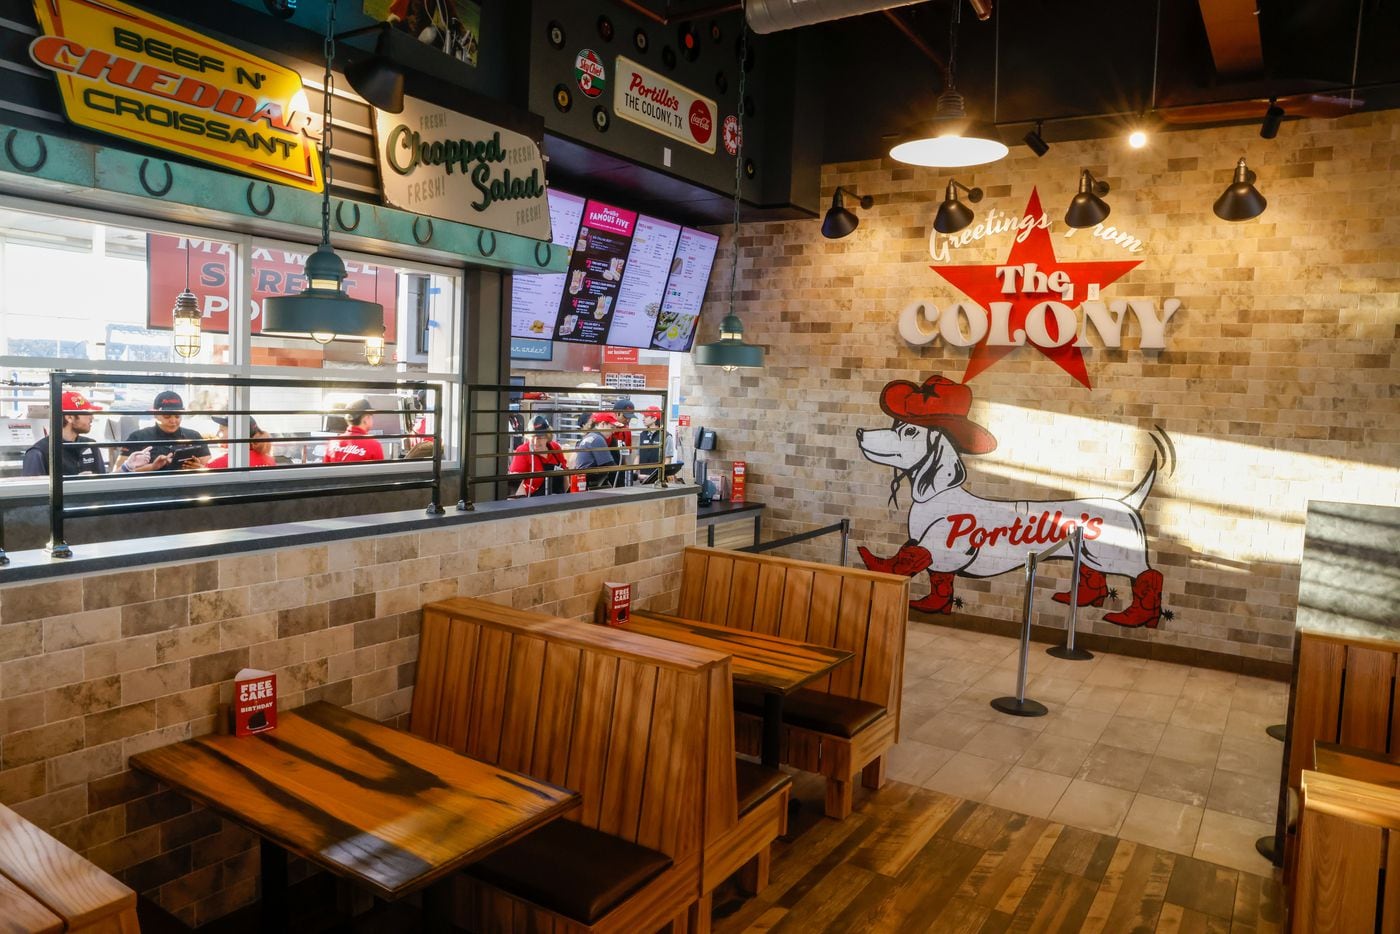 Portillo’s staff prepare for the dining spot’s opening in The Colony on Monday, Jan. 9, 2023.